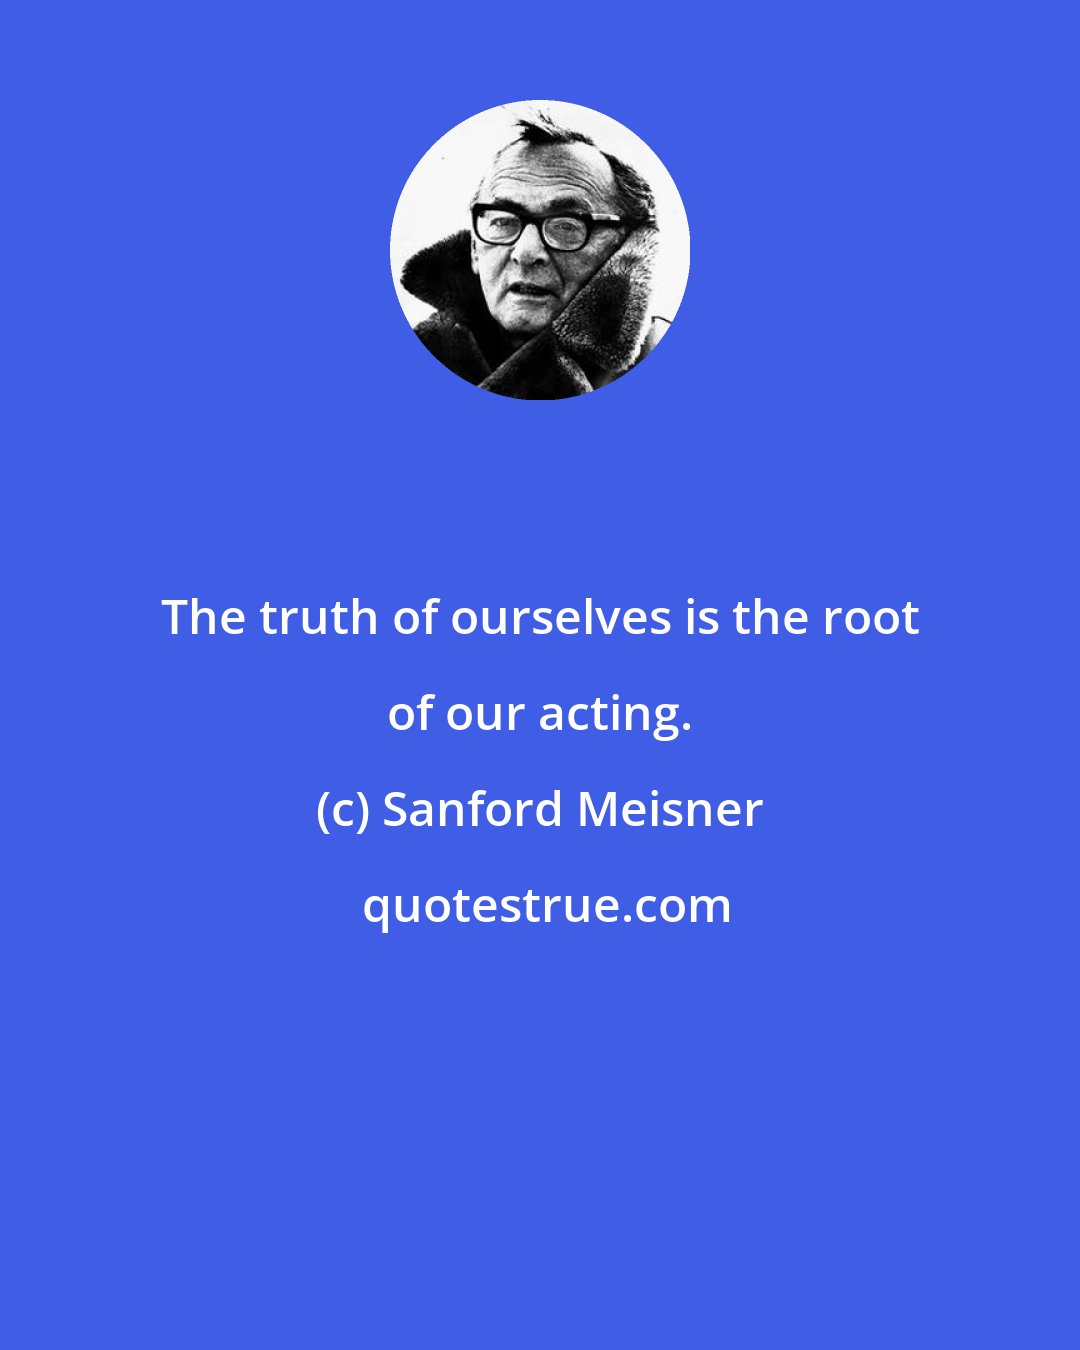 Sanford Meisner: The truth of ourselves is the root of our acting.